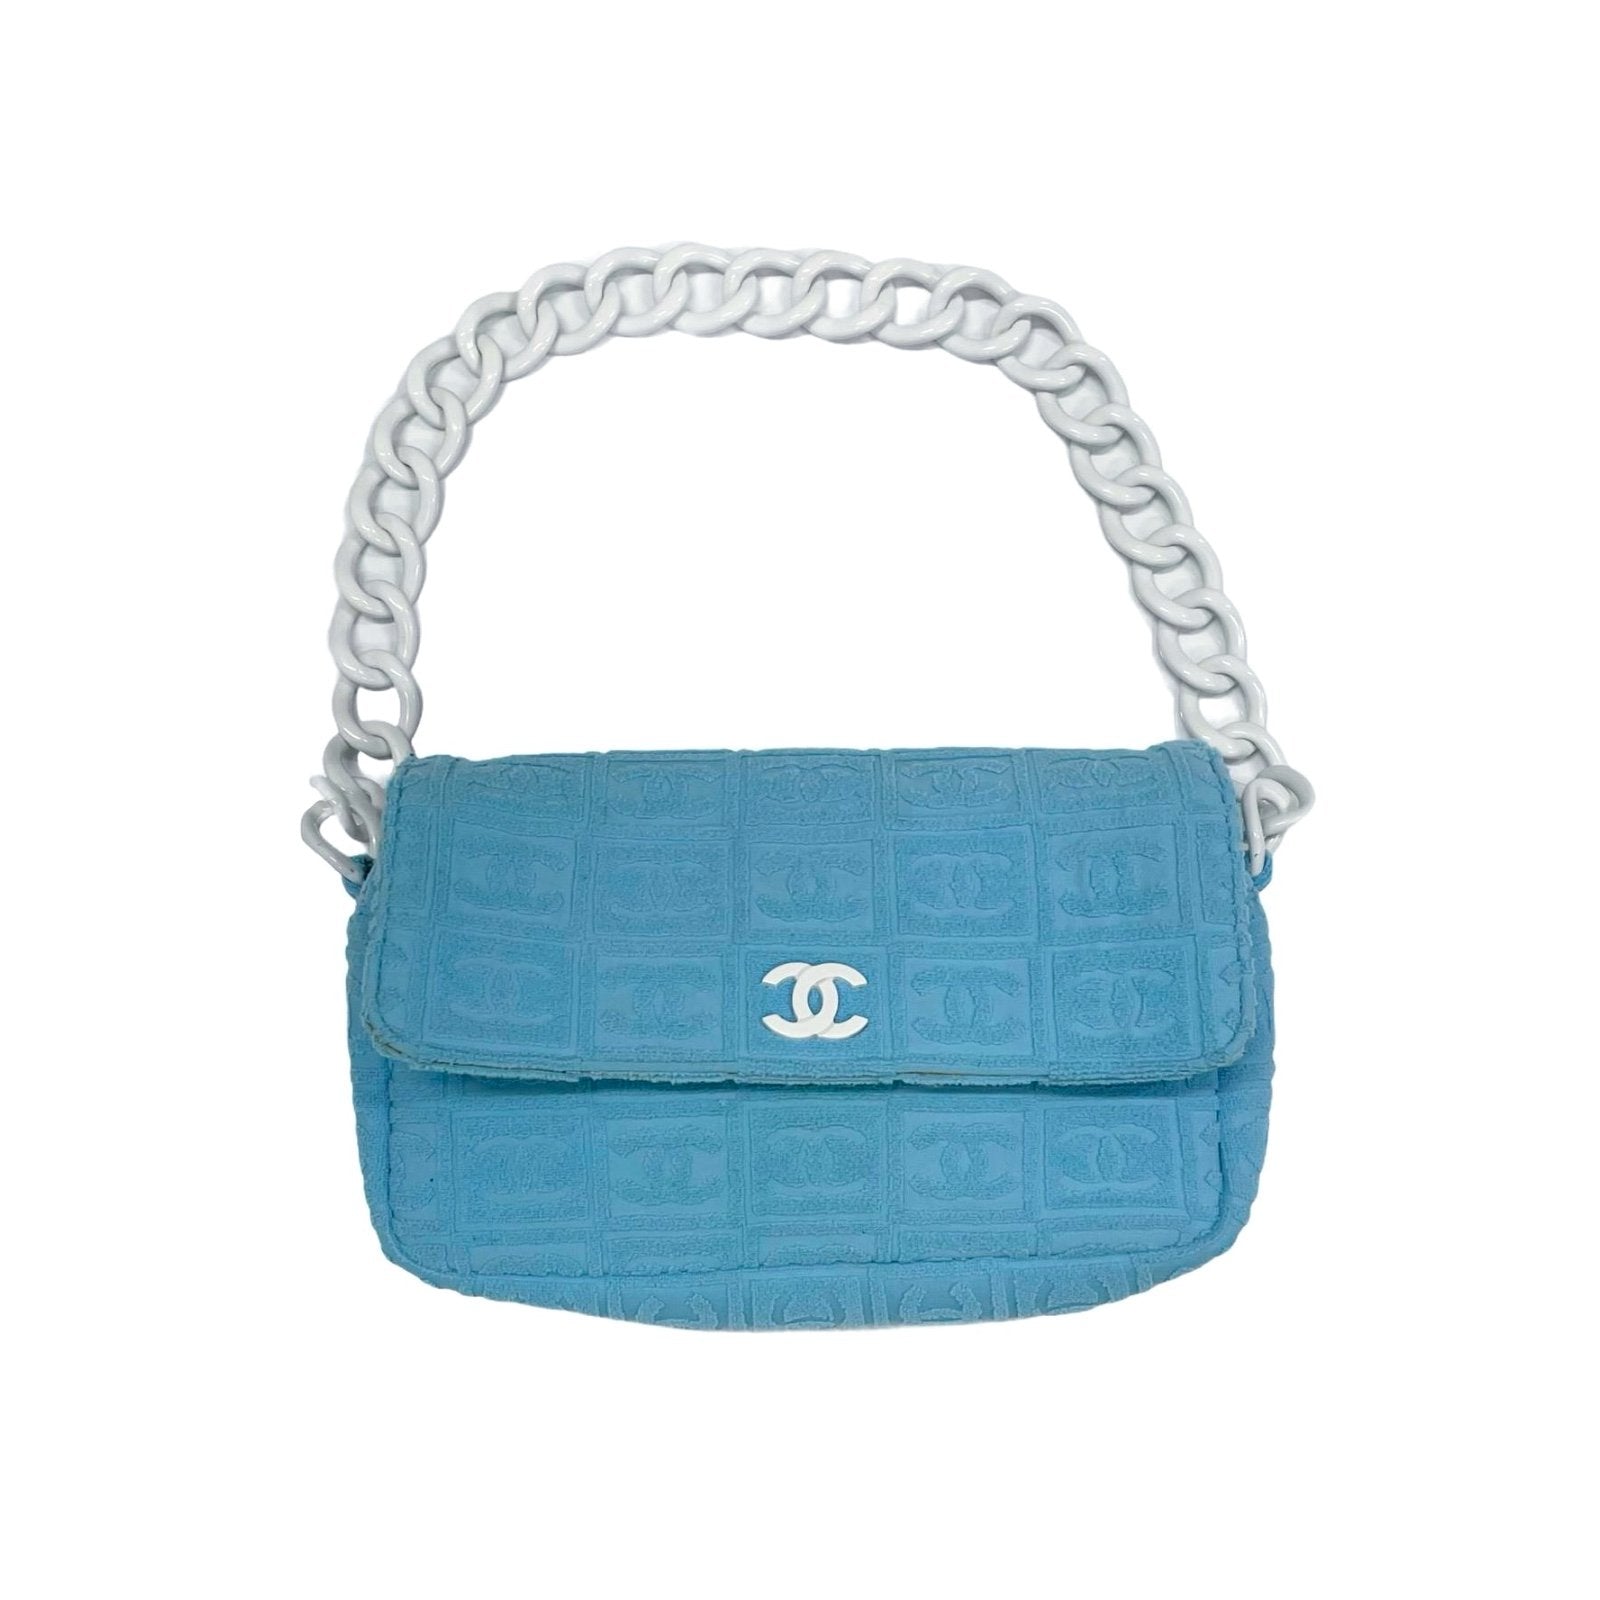 Treasures of NYC - Chanel Baby Blue Terry Cloth Mini Bag